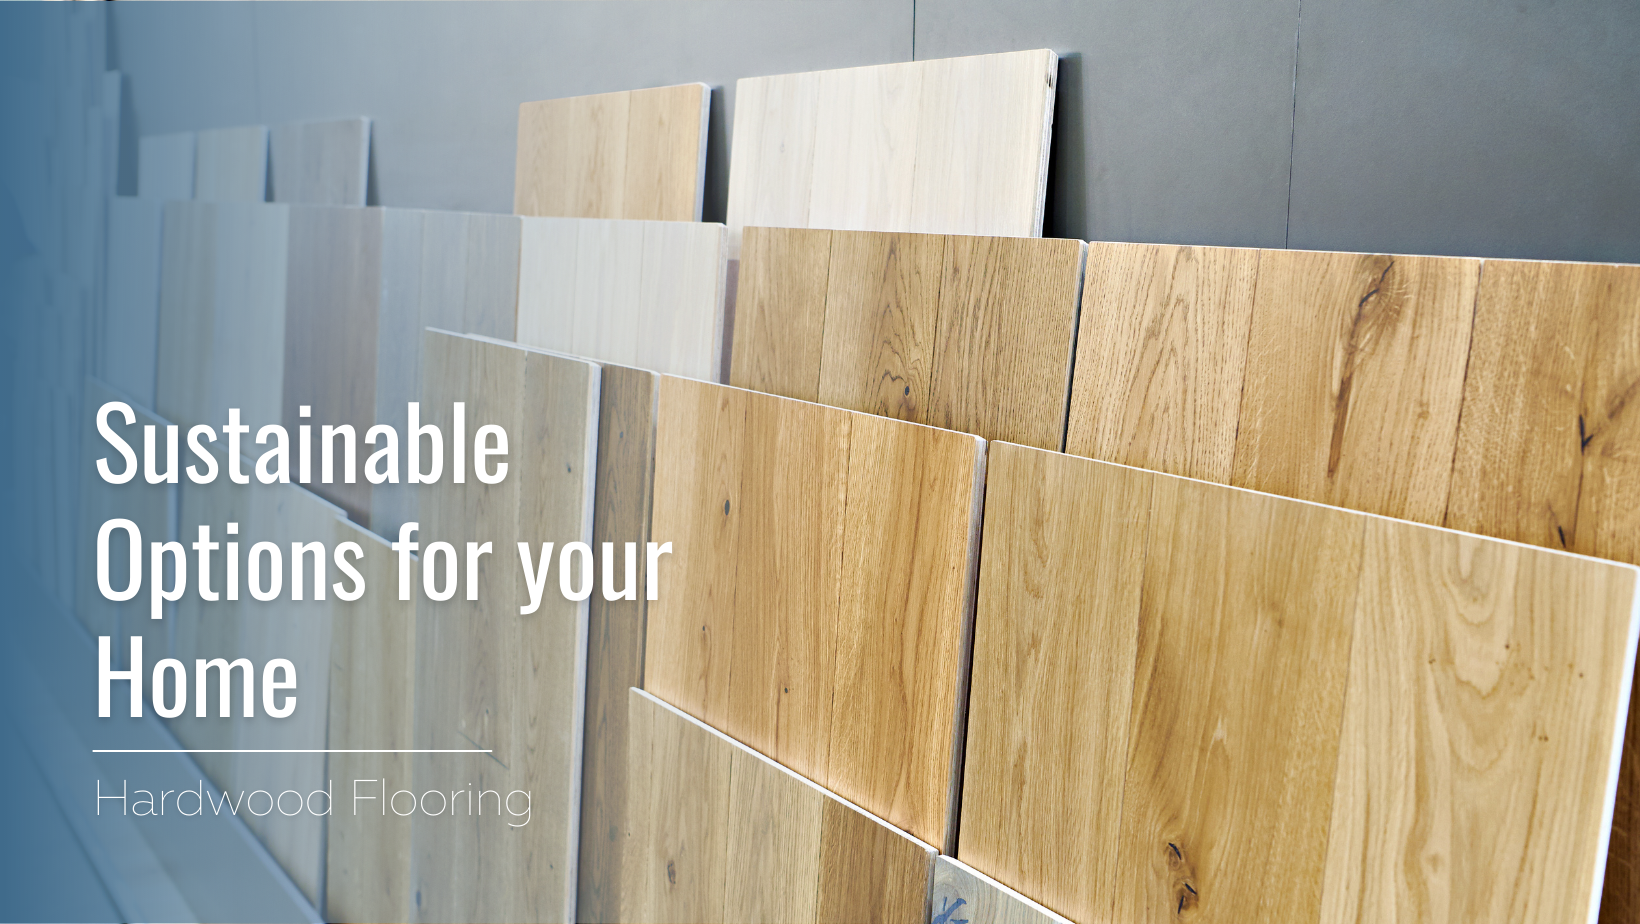 Sustainable Options for your Home Hardwood Flooring